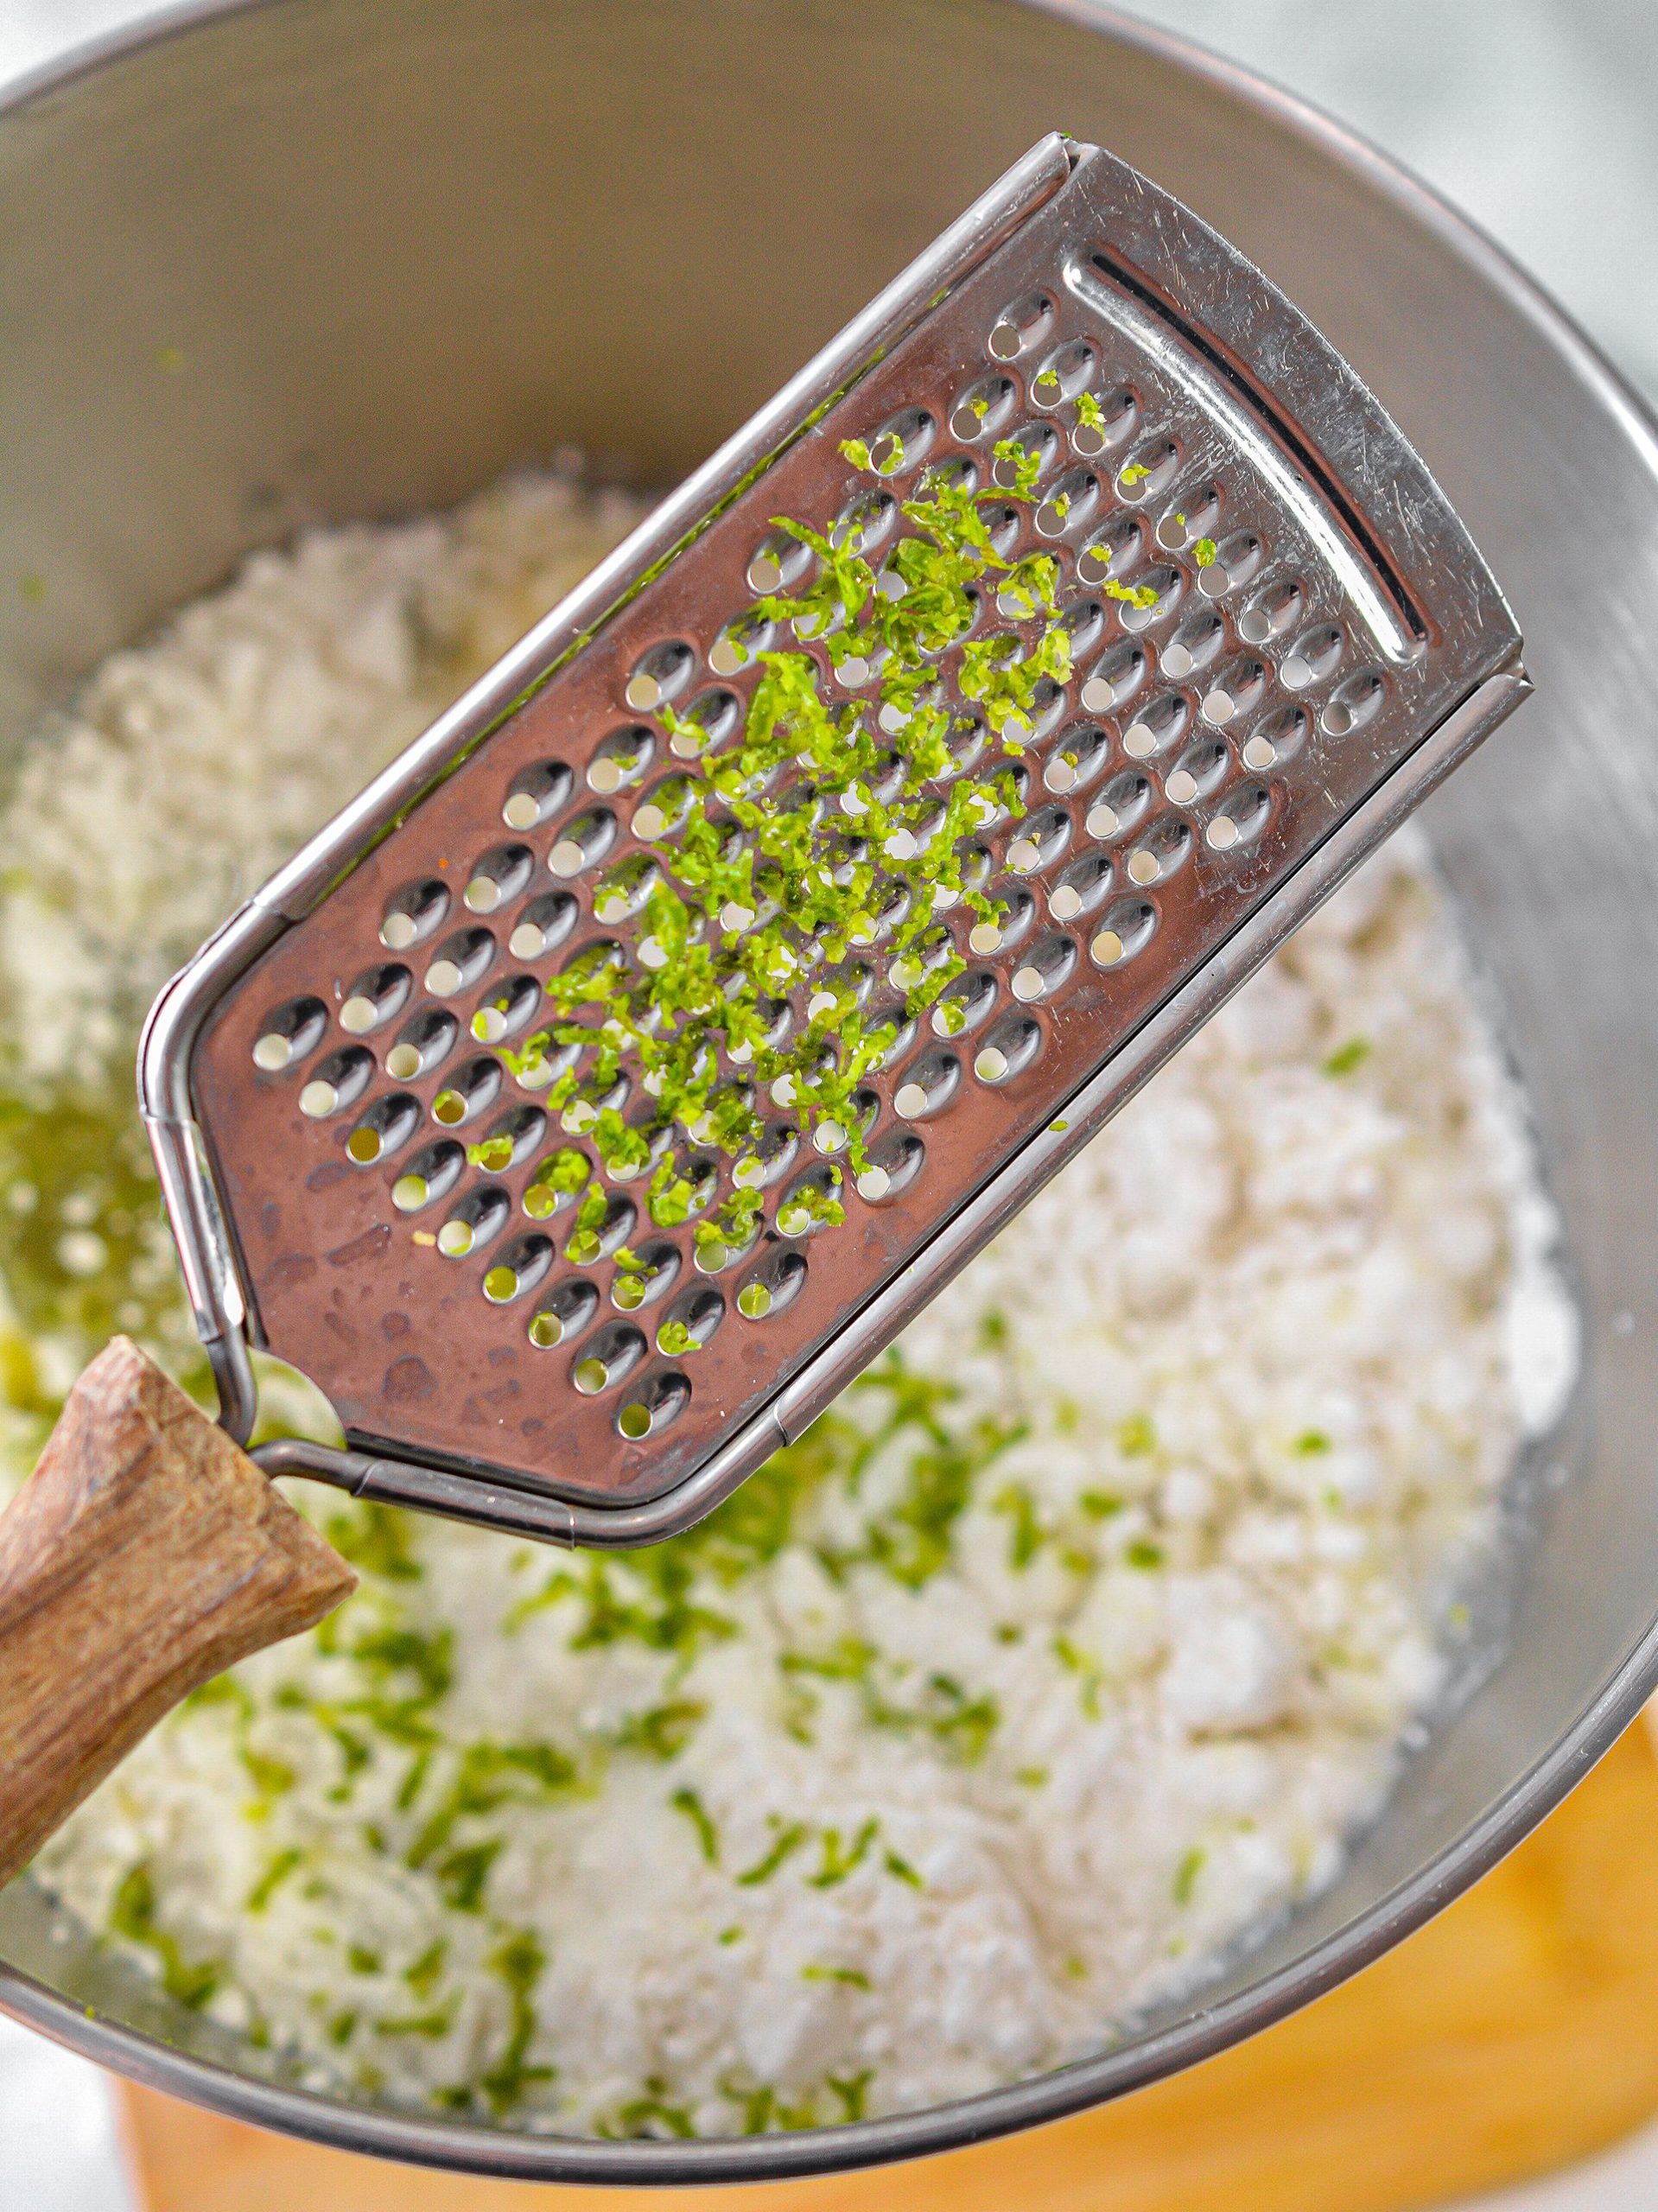 Adding the zest from one lime.